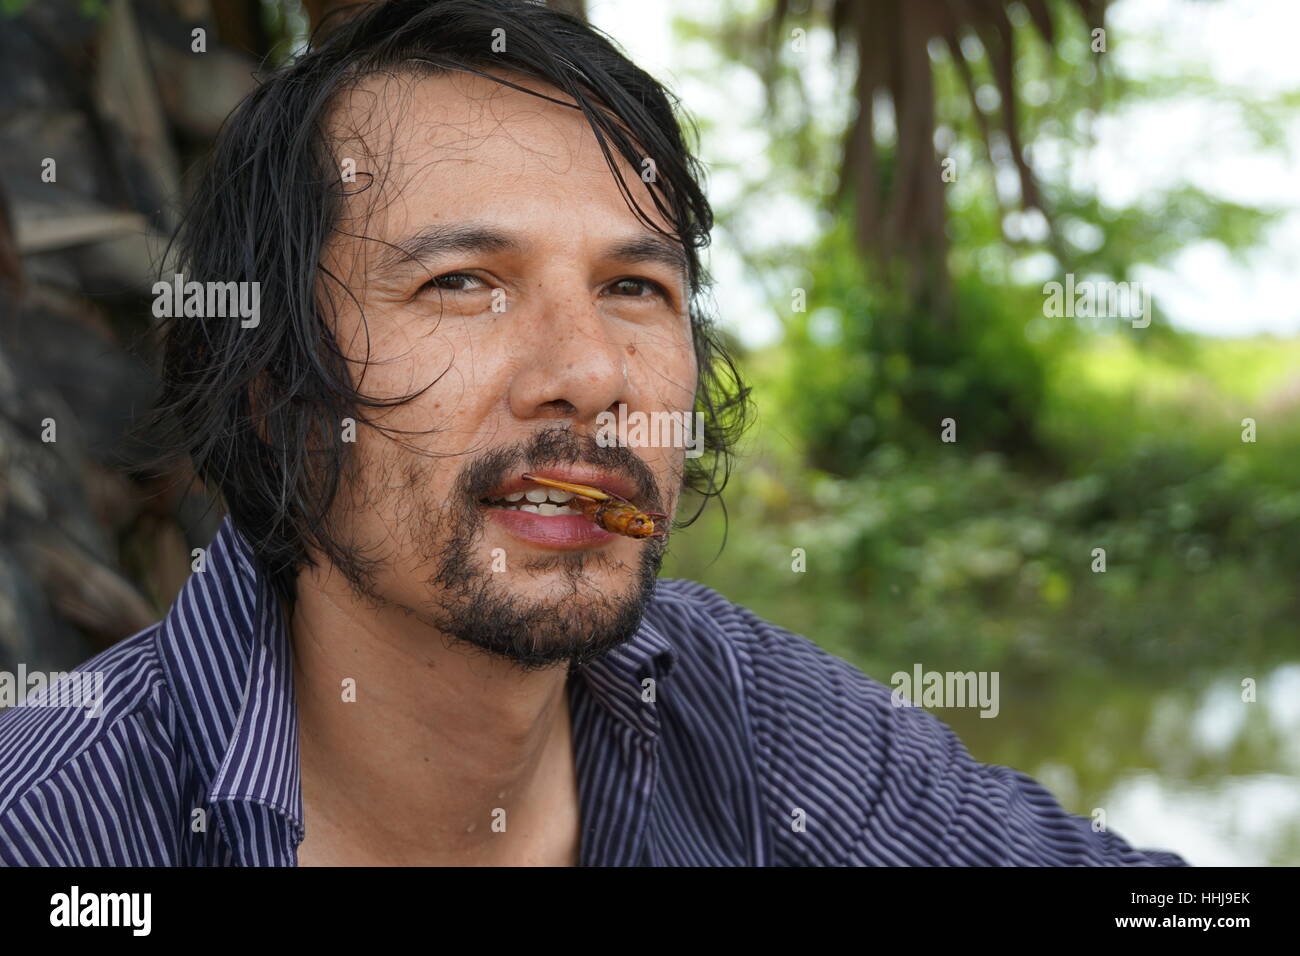 Man Holding a Fried Grasshopper in his Teeth in the Countryside / Rural Cambodia Stock Photo